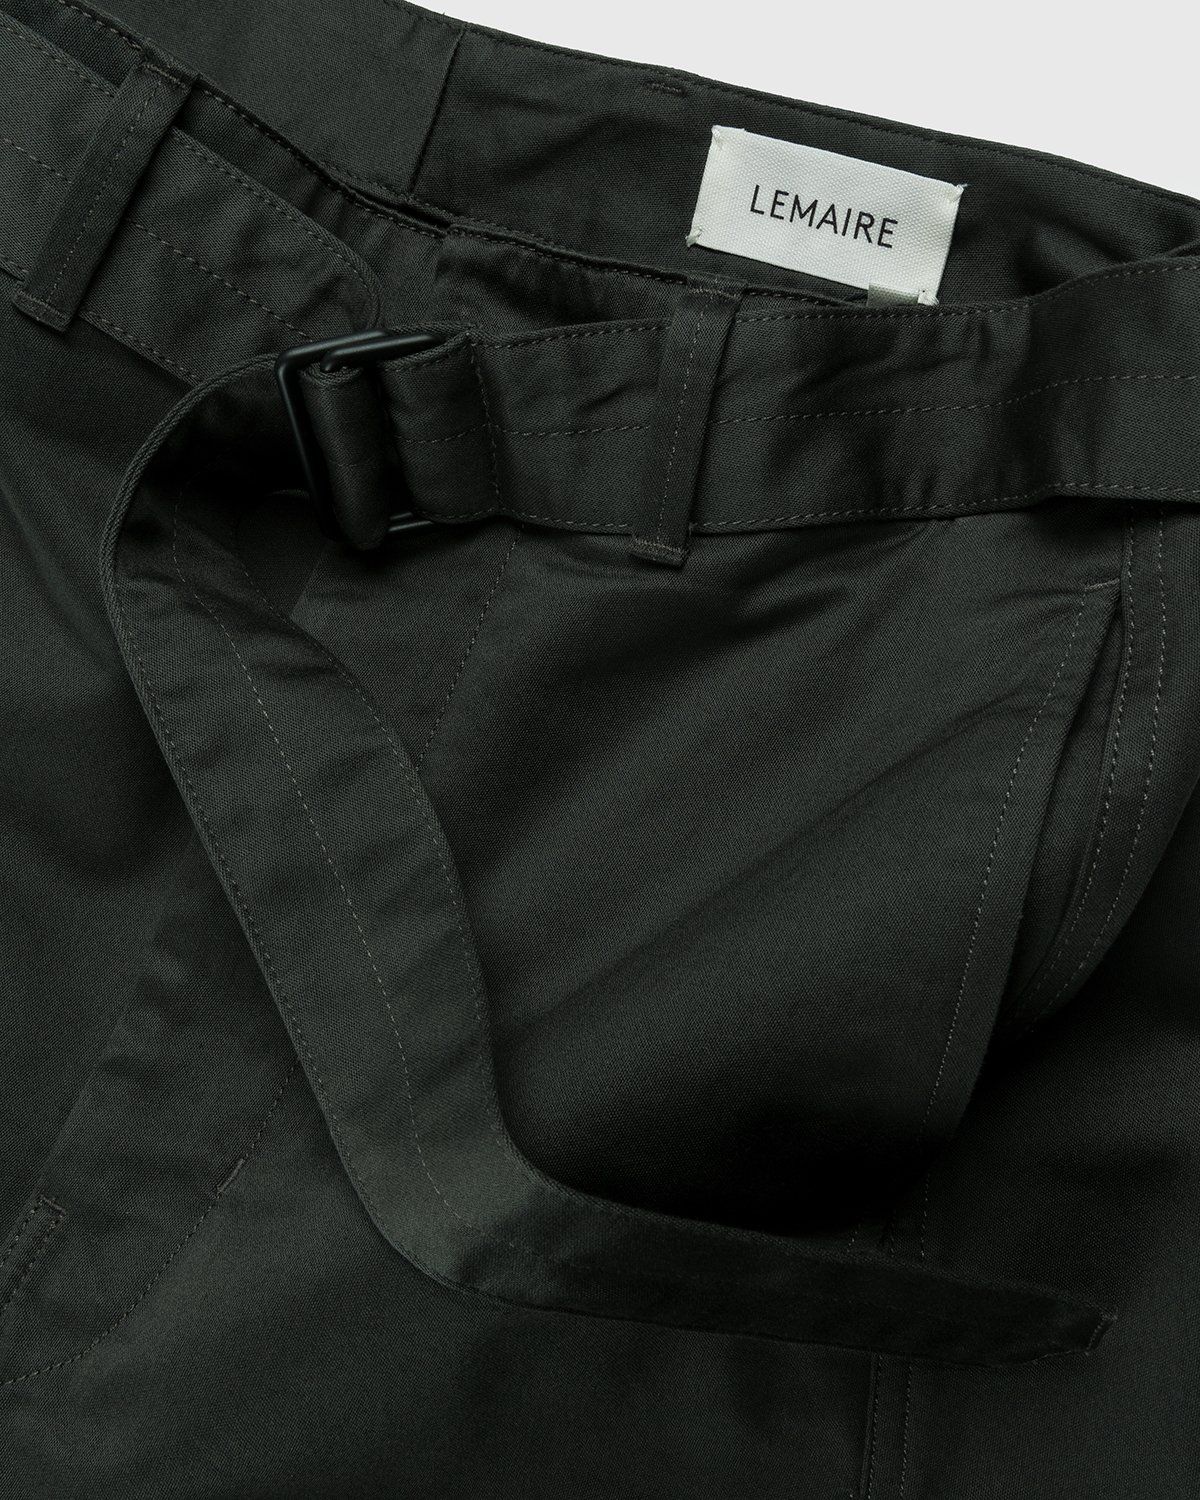 Lemaire – Twisted Belted Pants Dark Slate Green - Pants - Grey - Image 5